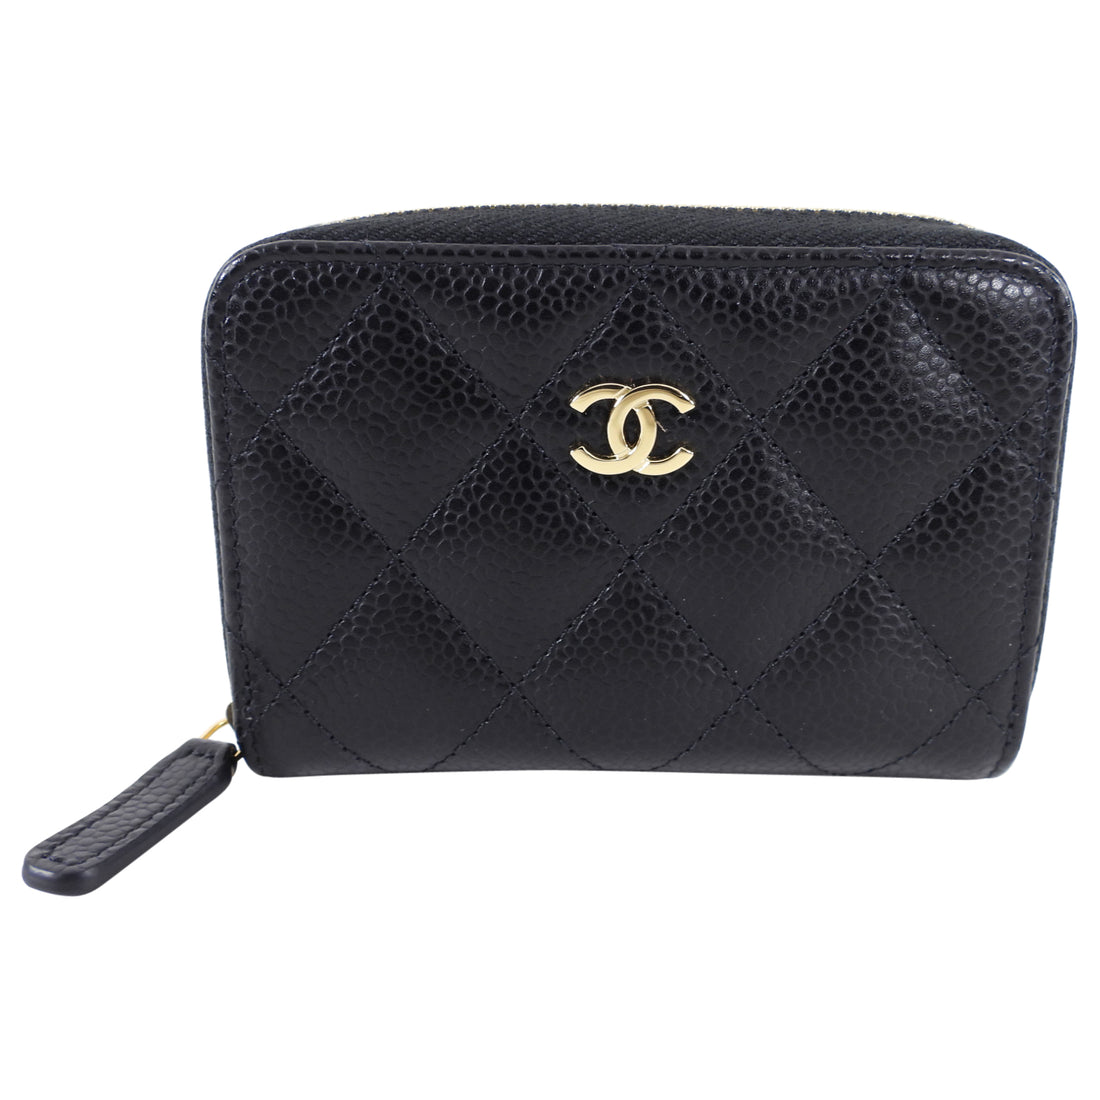 CHANEL, Bags, Chanel Caviar Zip Coin Purse Black Wallet Ghw Gold